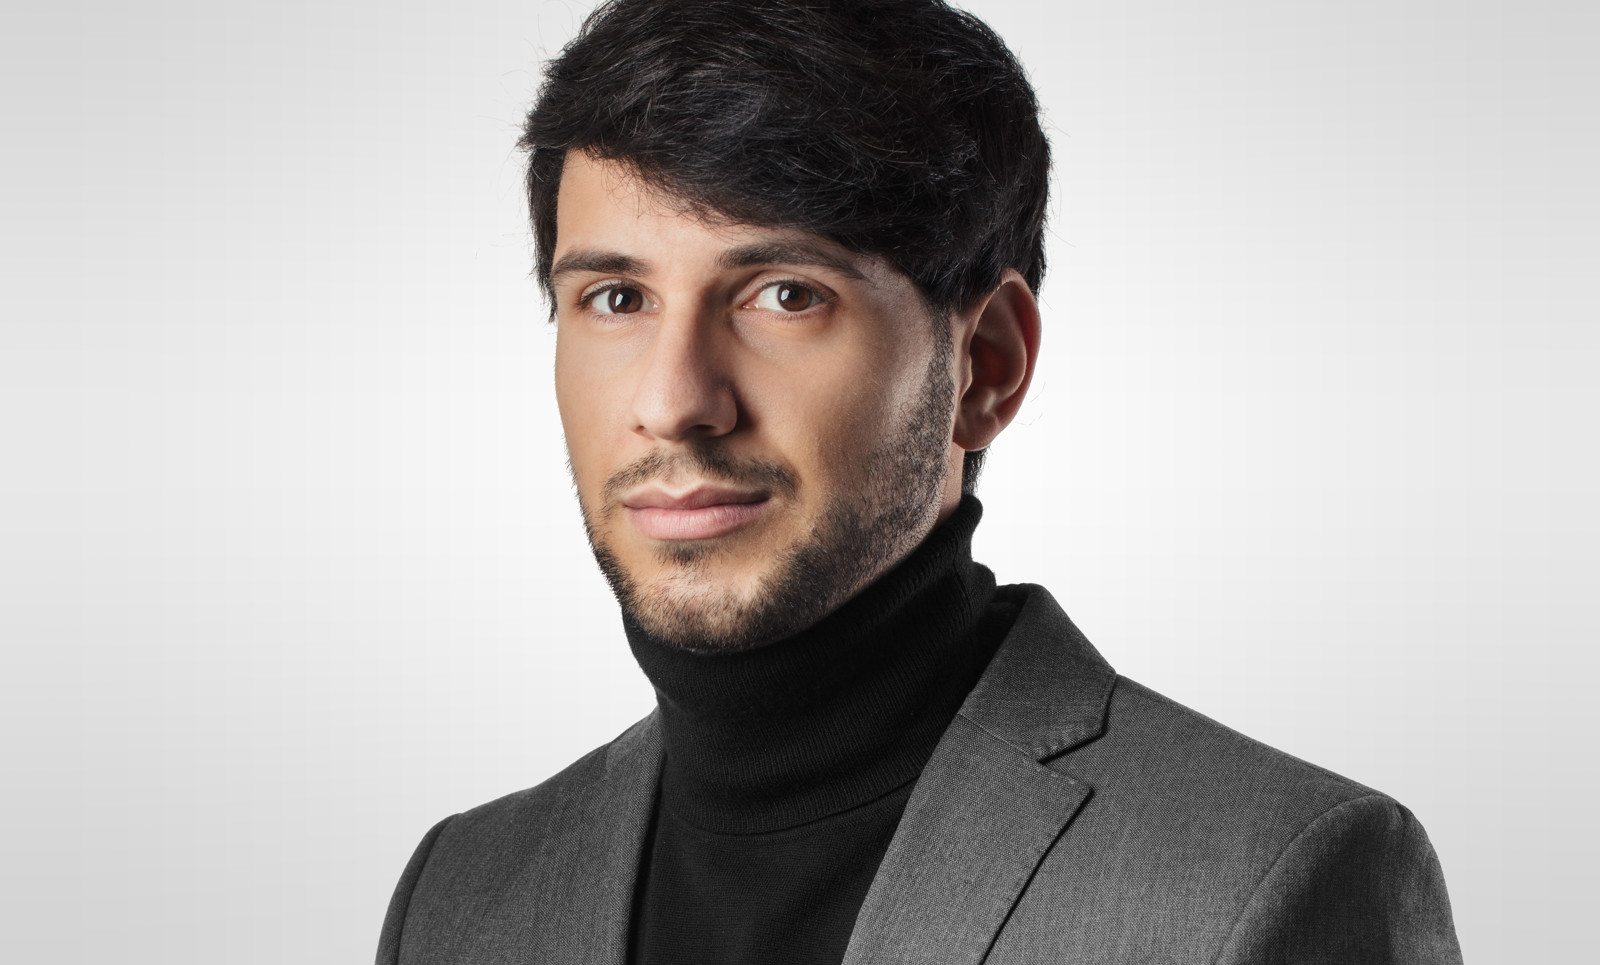 Our CEO Alberto Morelli enters the Top100 Forbes U30